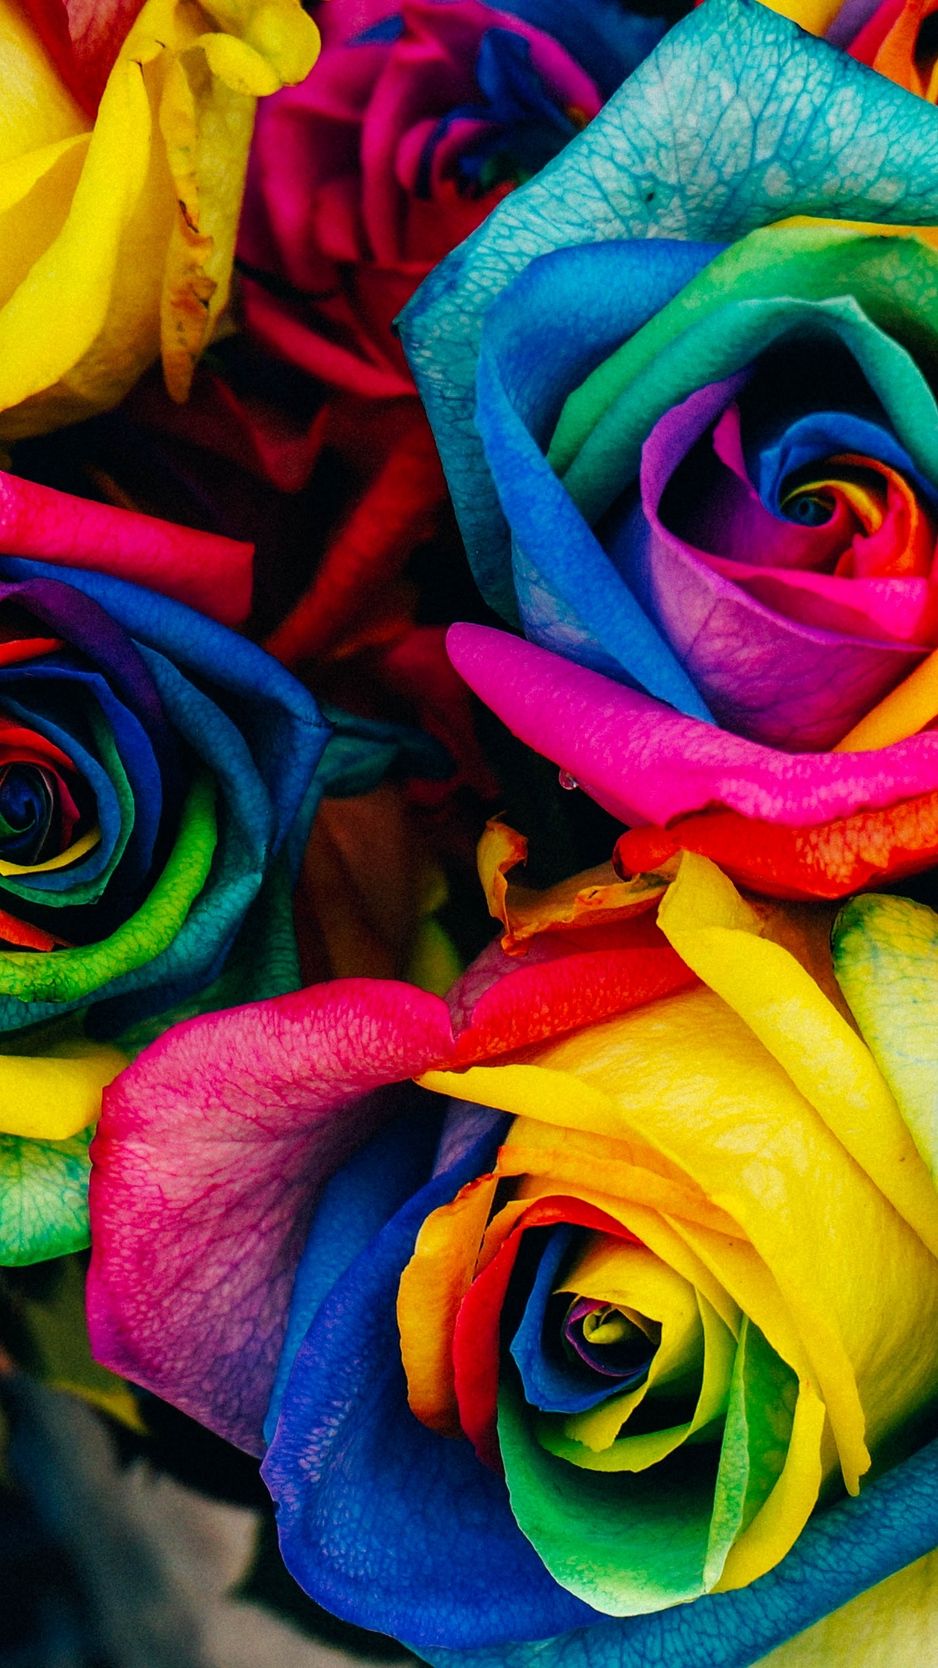 Download Wallpaper 938x1668 Roses, Colorful, Rainbow Iphone 8 7 6s